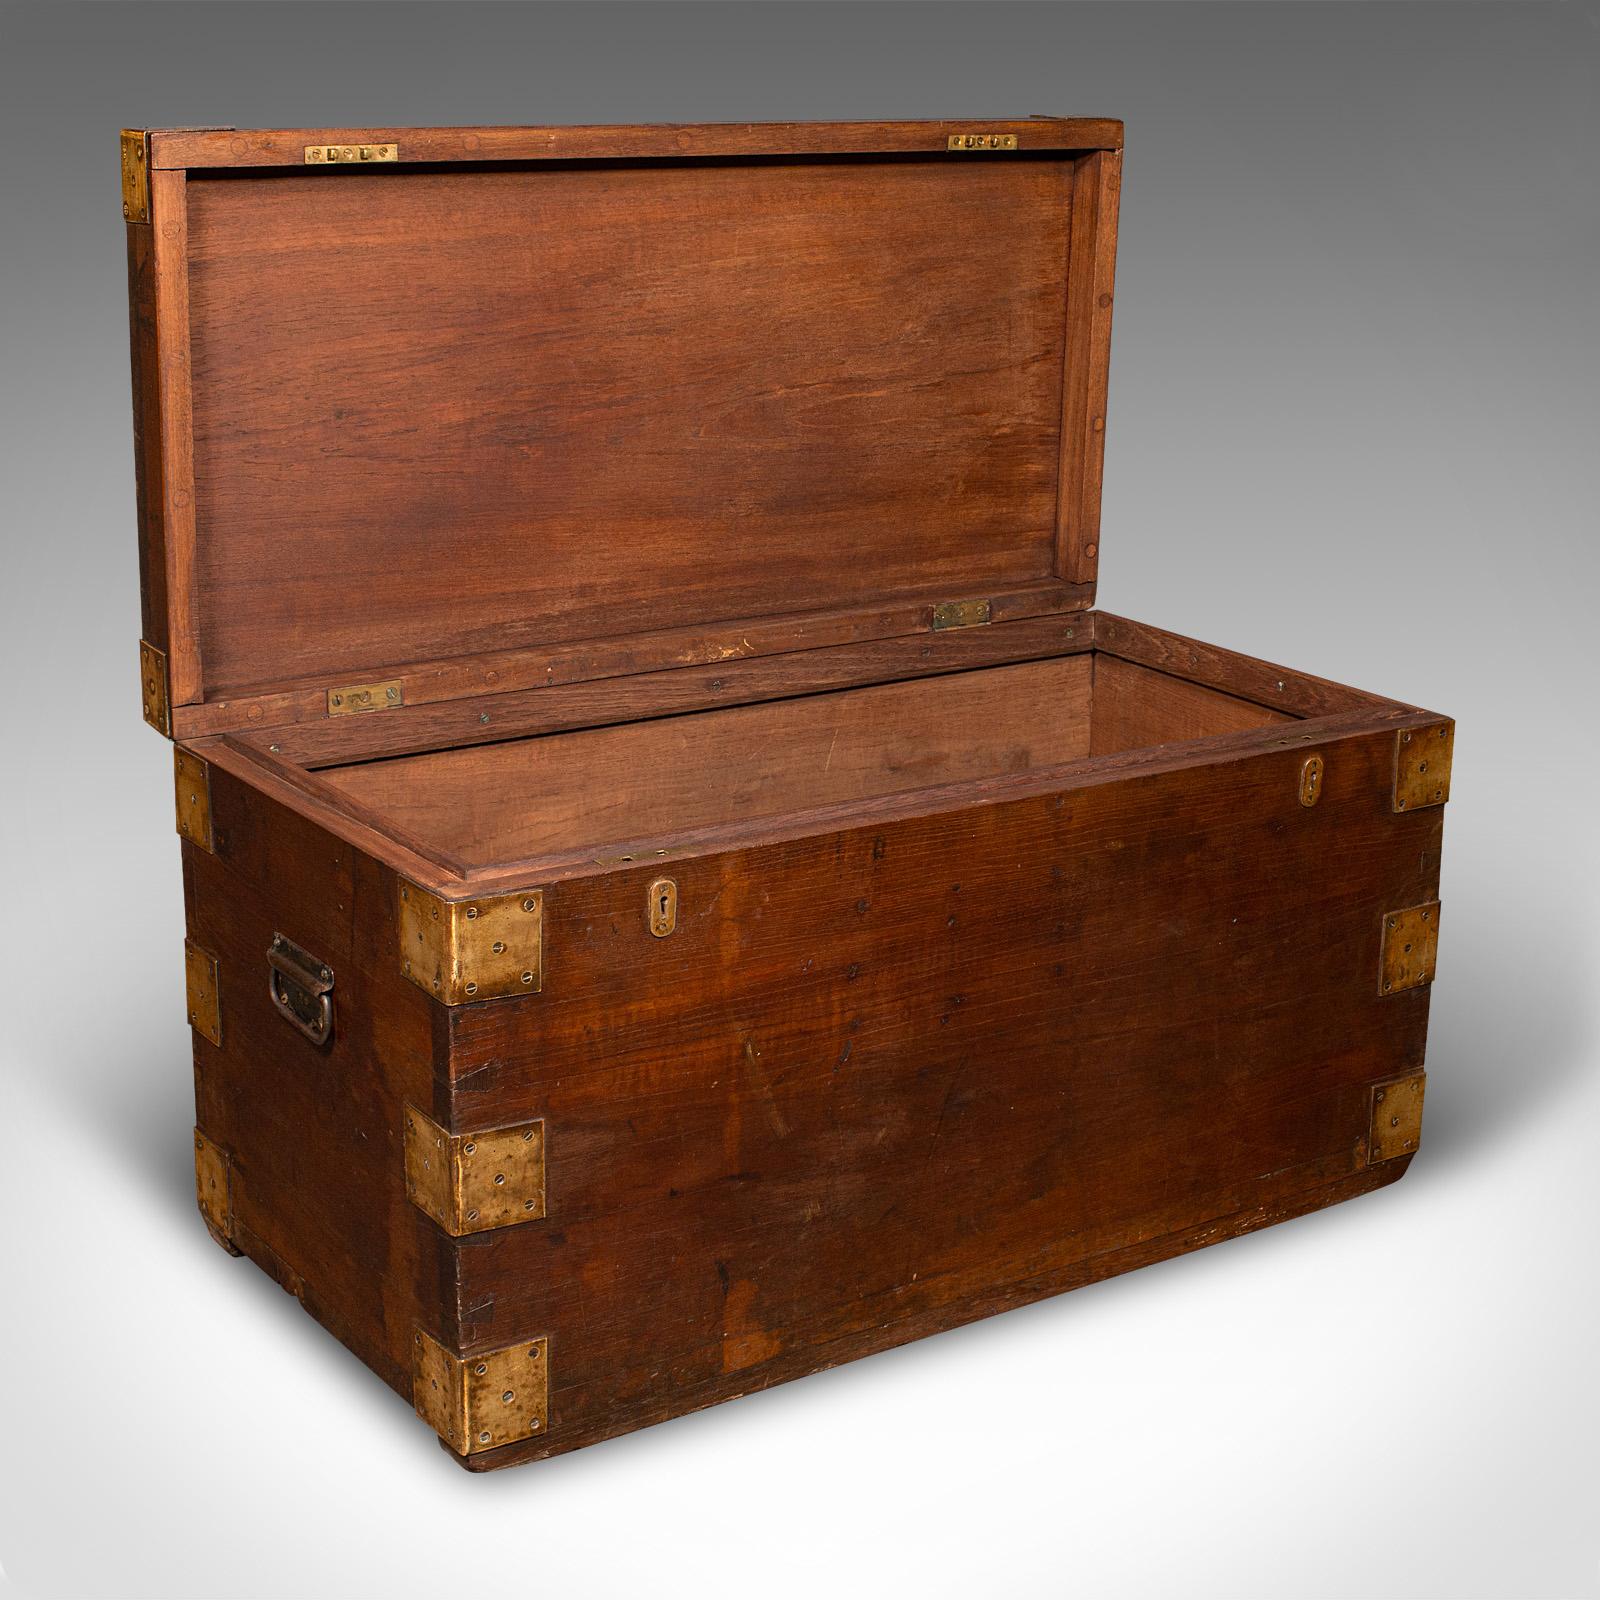 
This is a vintage campaign silver chest. An English, teak and brass capped shipping trunk, dating to the Art Deco period, circa 1940.

Appealing example with superb, stout stocks and eye-catching finish
Displays a desirable aged patina and in good